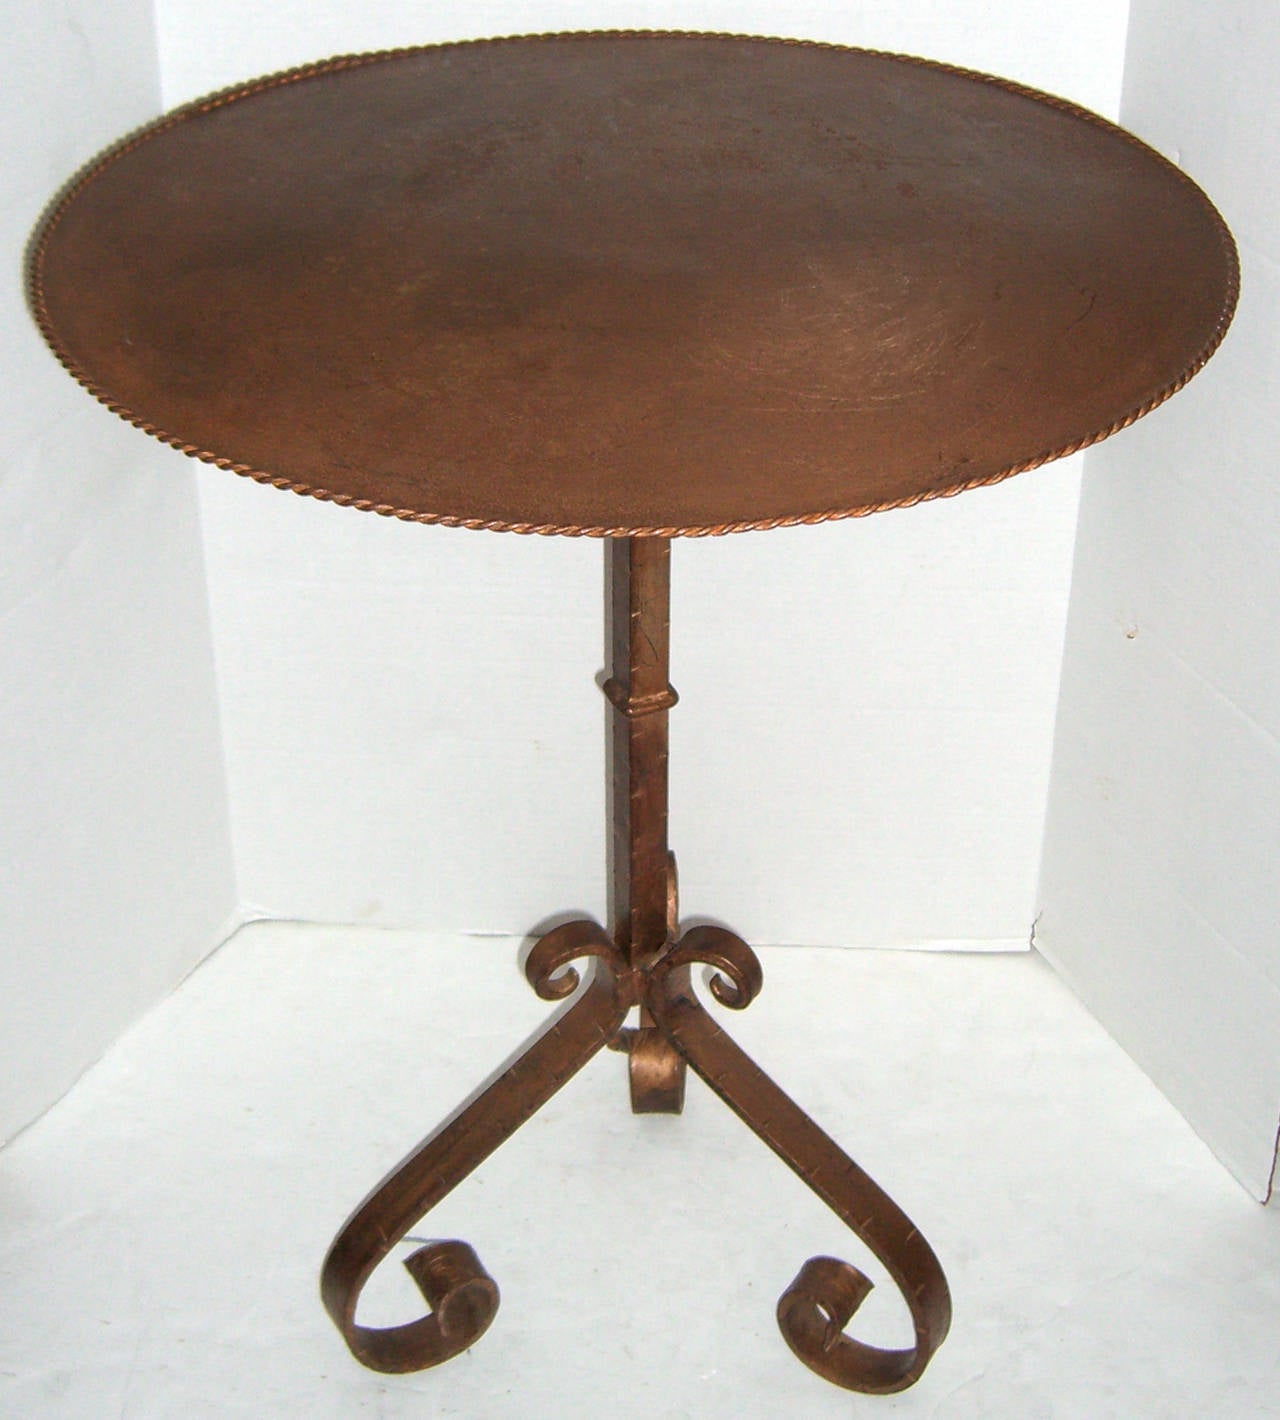 A tripod gilt iron candle stand base is re-purposed as a bistro table with the addition of a patinated metal top.